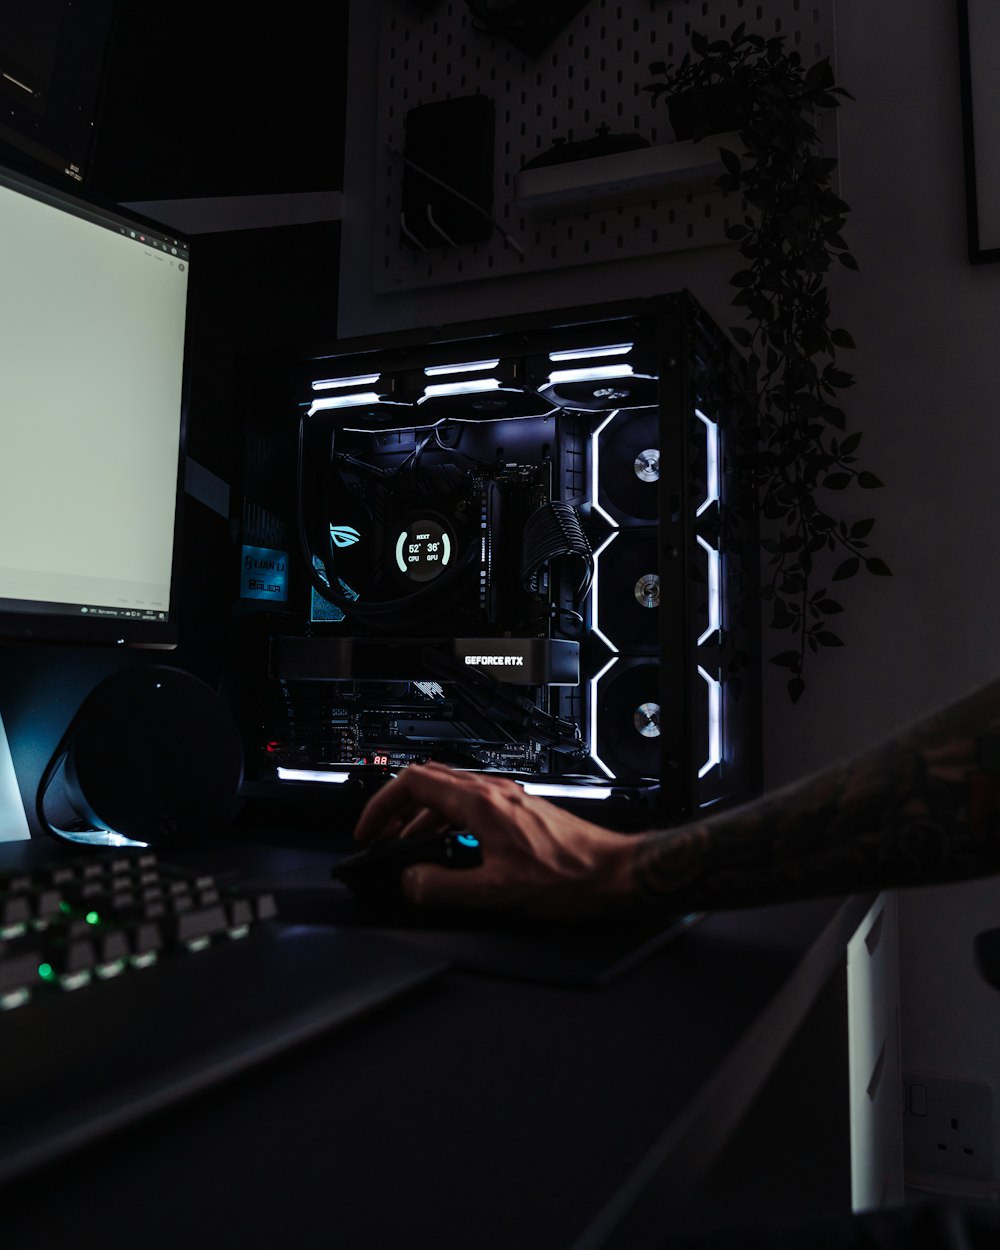 Are Gaming PCs Good For Video Editing?